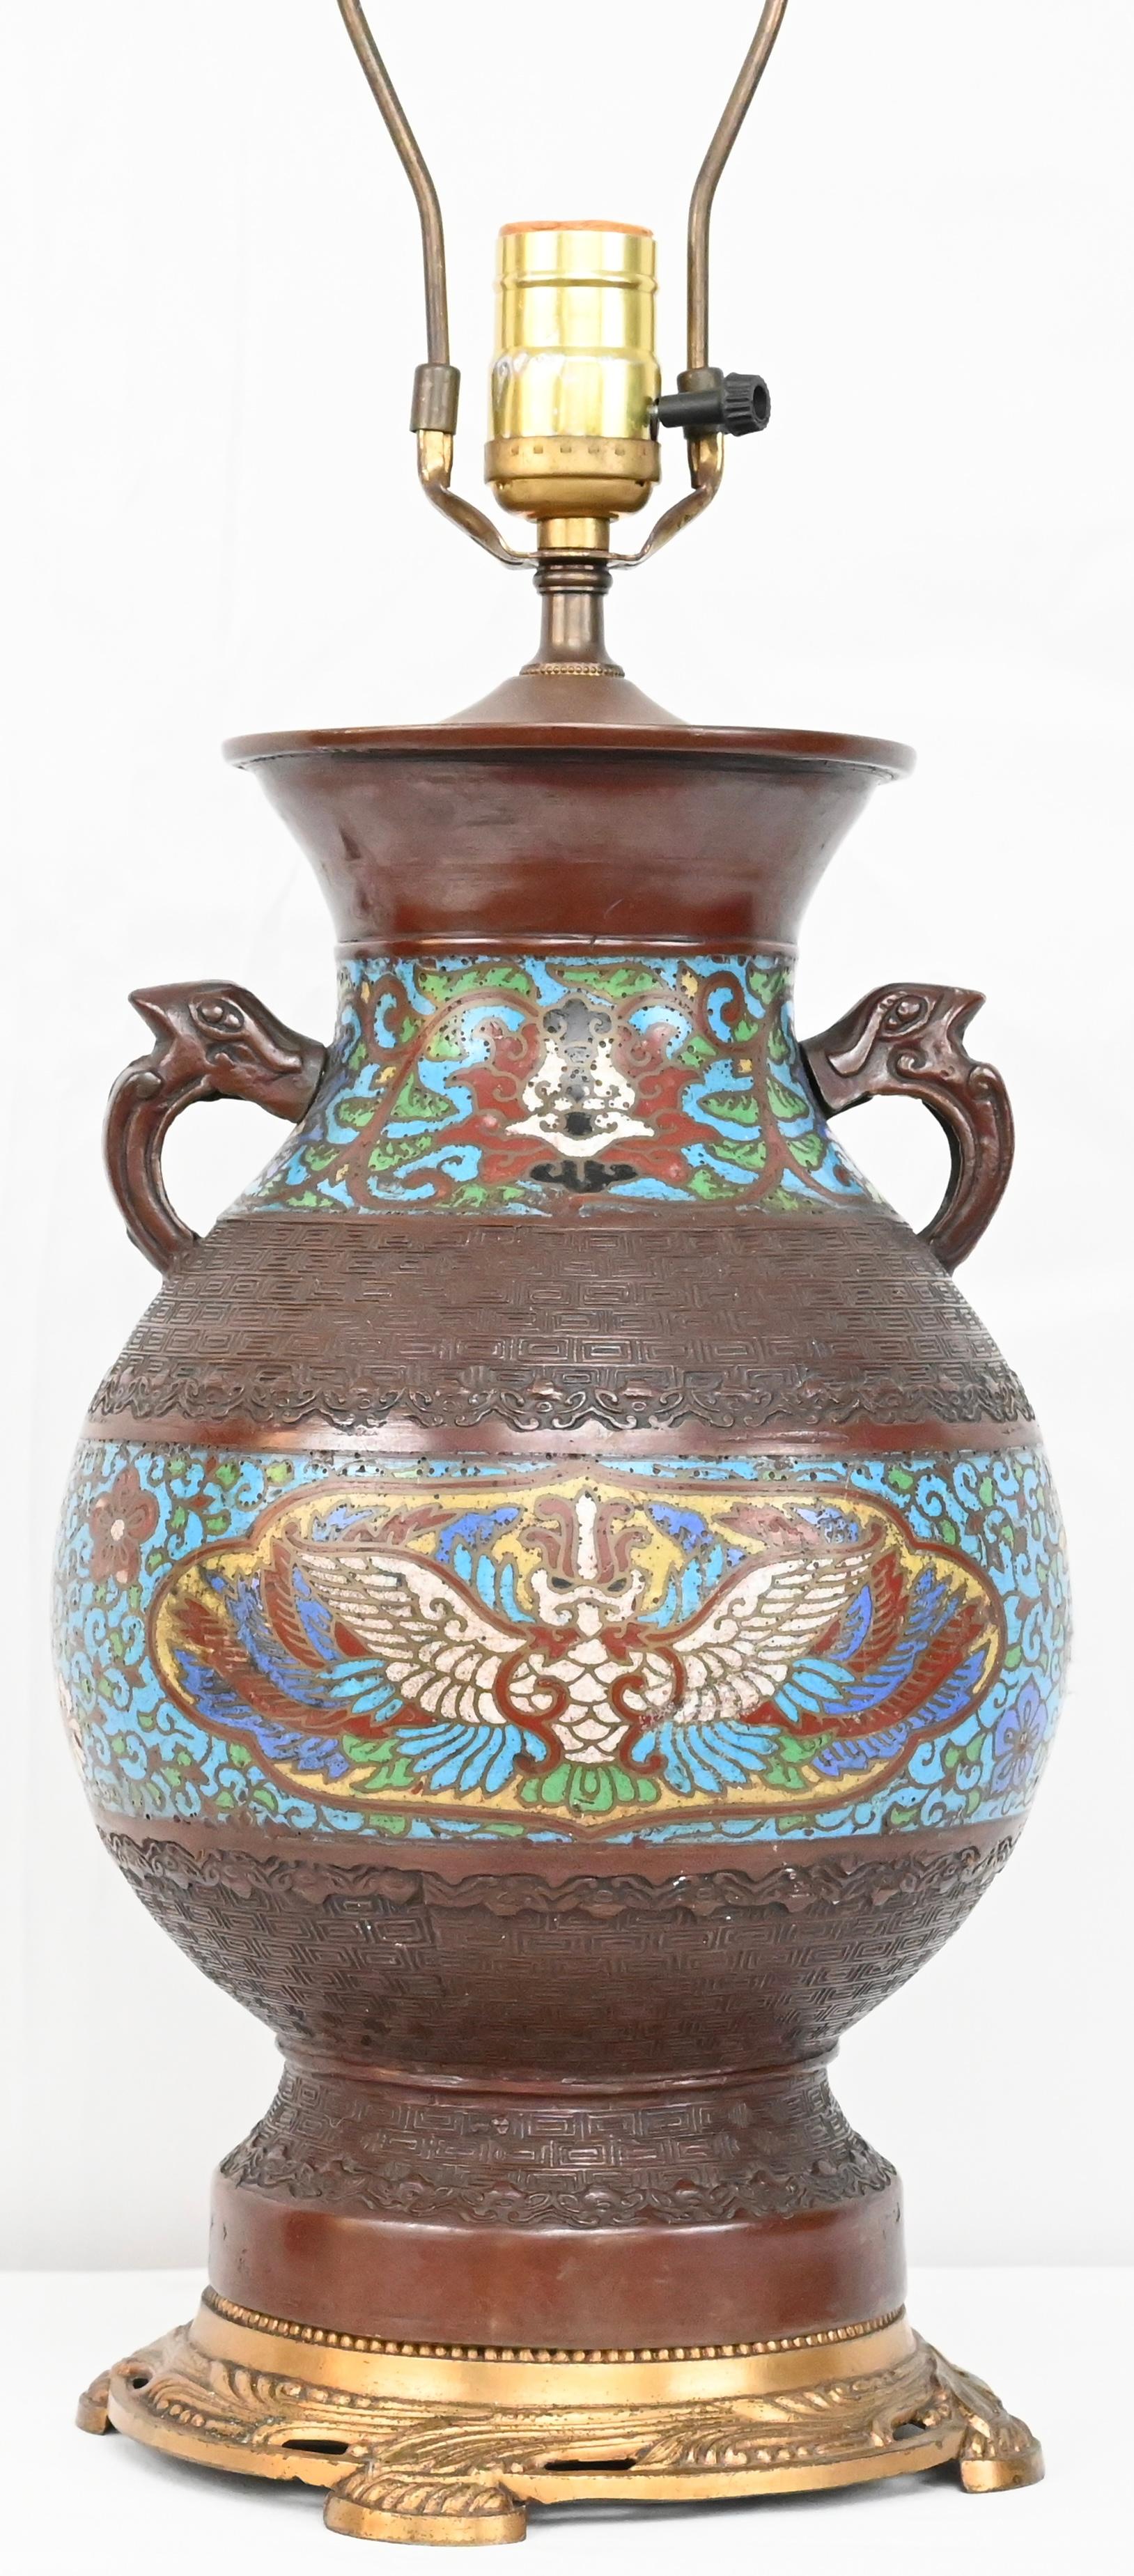 A fine quality Japanese Cloisonné Lamp, with blue, red and green enamel inlay on a brass base. 

This Japanese Cloisonne Table Lamp was hand-crafted with attention to details, cloisonne on the gold brass base with traditional decoration patterns. It